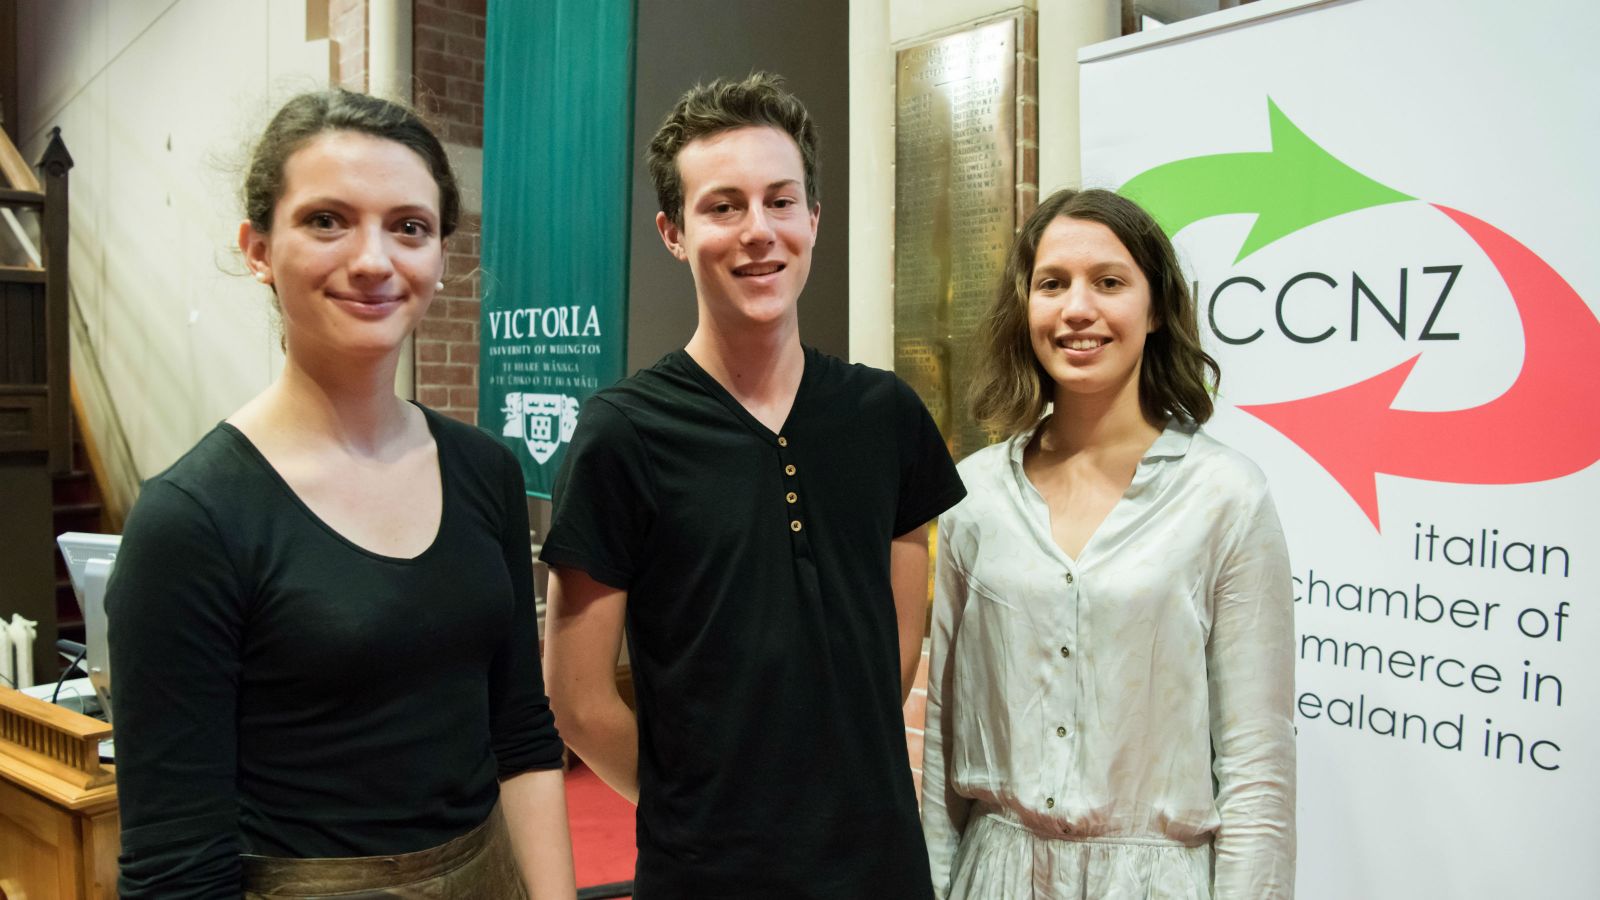 The winners of the Moving Words 2016 competition: Alva Feldmeier, Max Hall and Danielle Cooper.